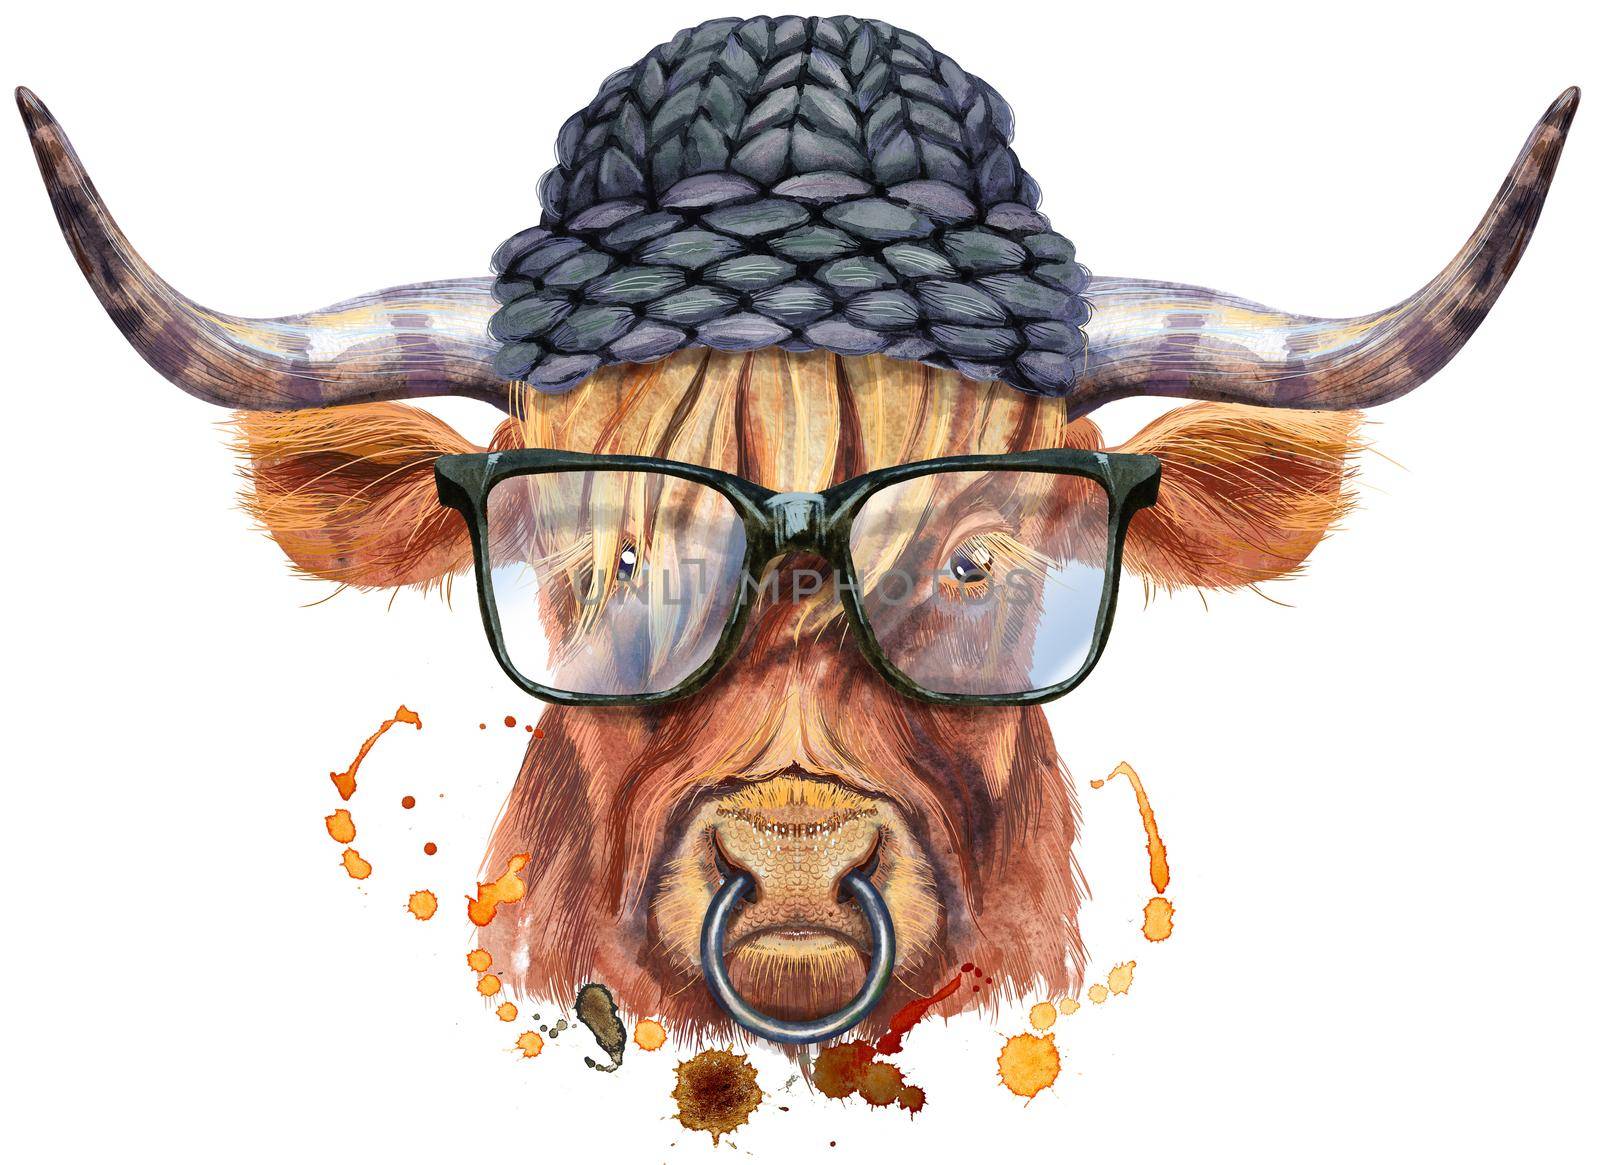 Watercolor illustration of a brown long-horned bull with glasses and black hat by NataOmsk